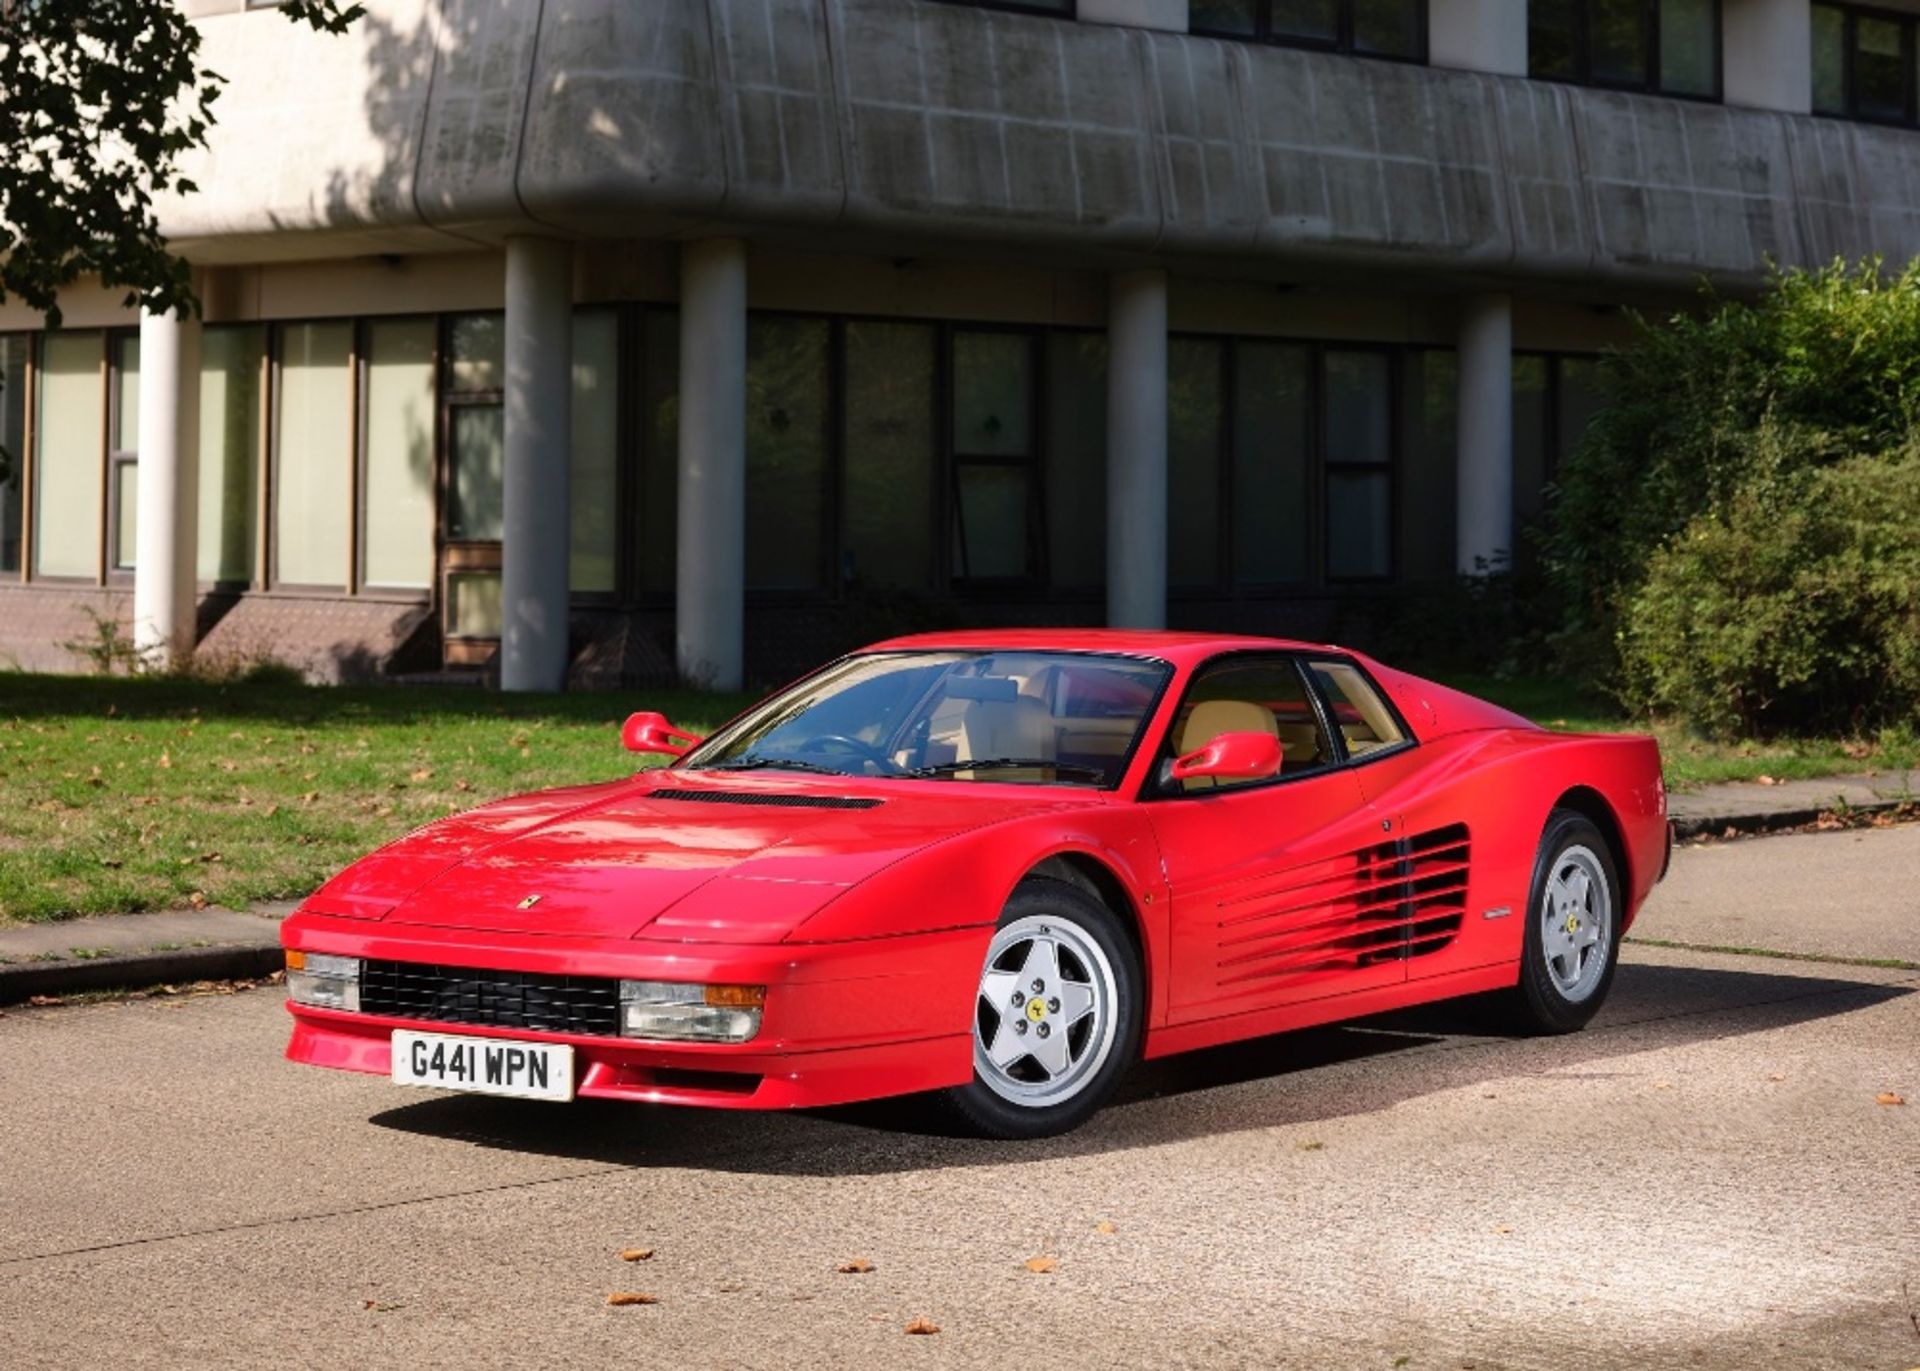 1989 FERRARI TESTAROSSA Registration Number: G441 WPN Chassis Number: ZFFAA17C000082817 Recorded - Image 2 of 59